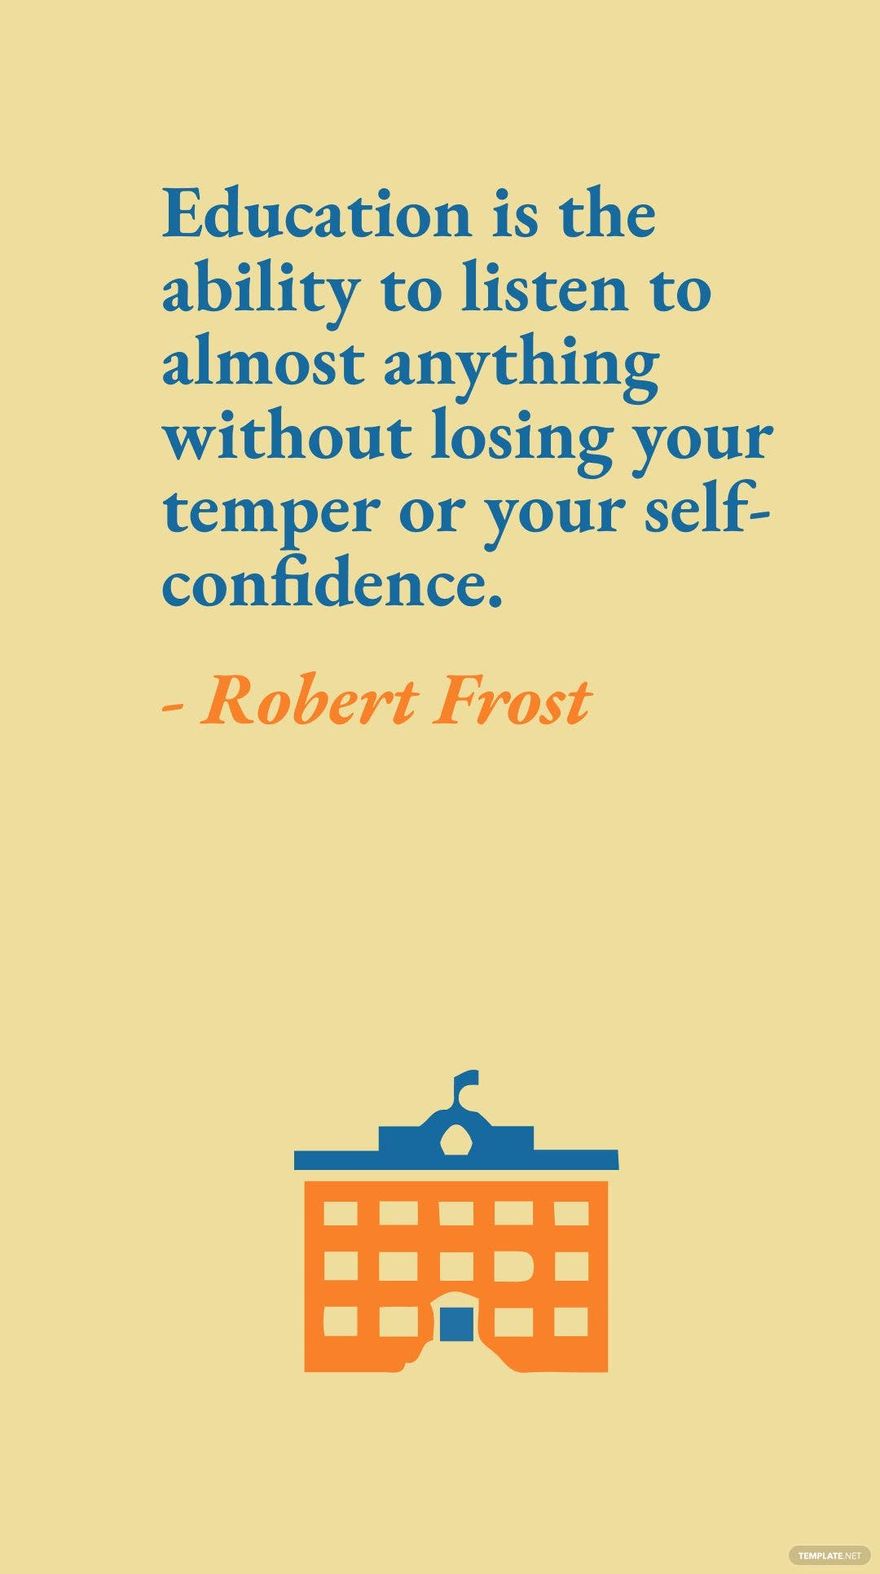 Robert Frost - Education is the ability to listen to almost anything without losing your temper or your self-confidence.